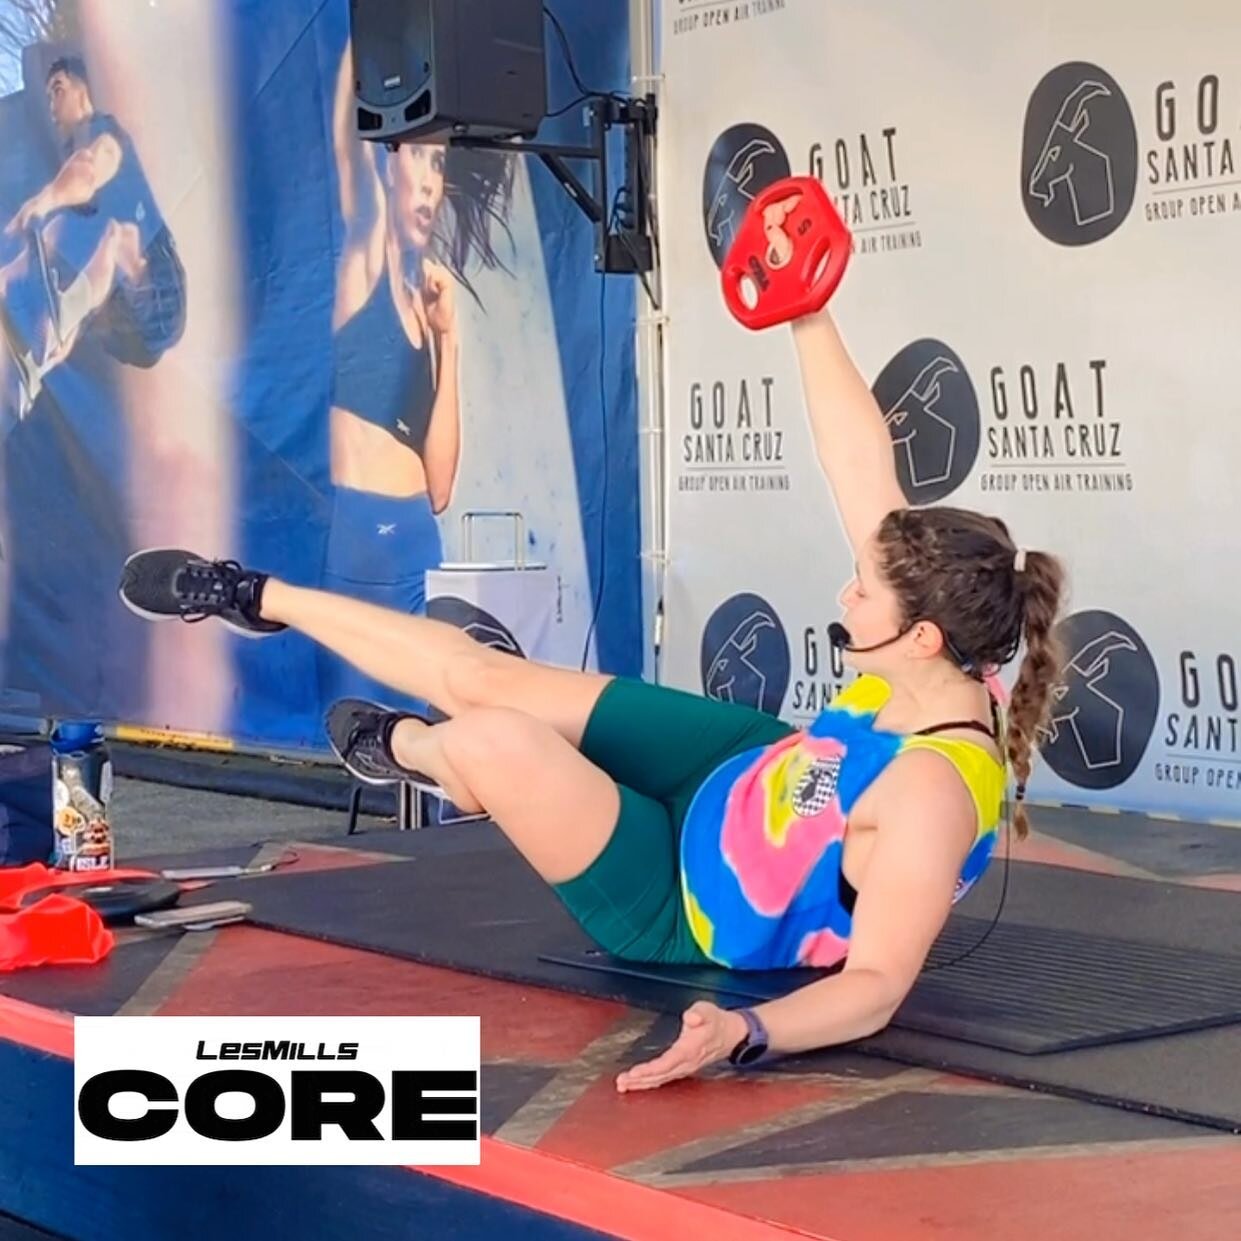 30 minutes of dynamic core training! Express pass $5!